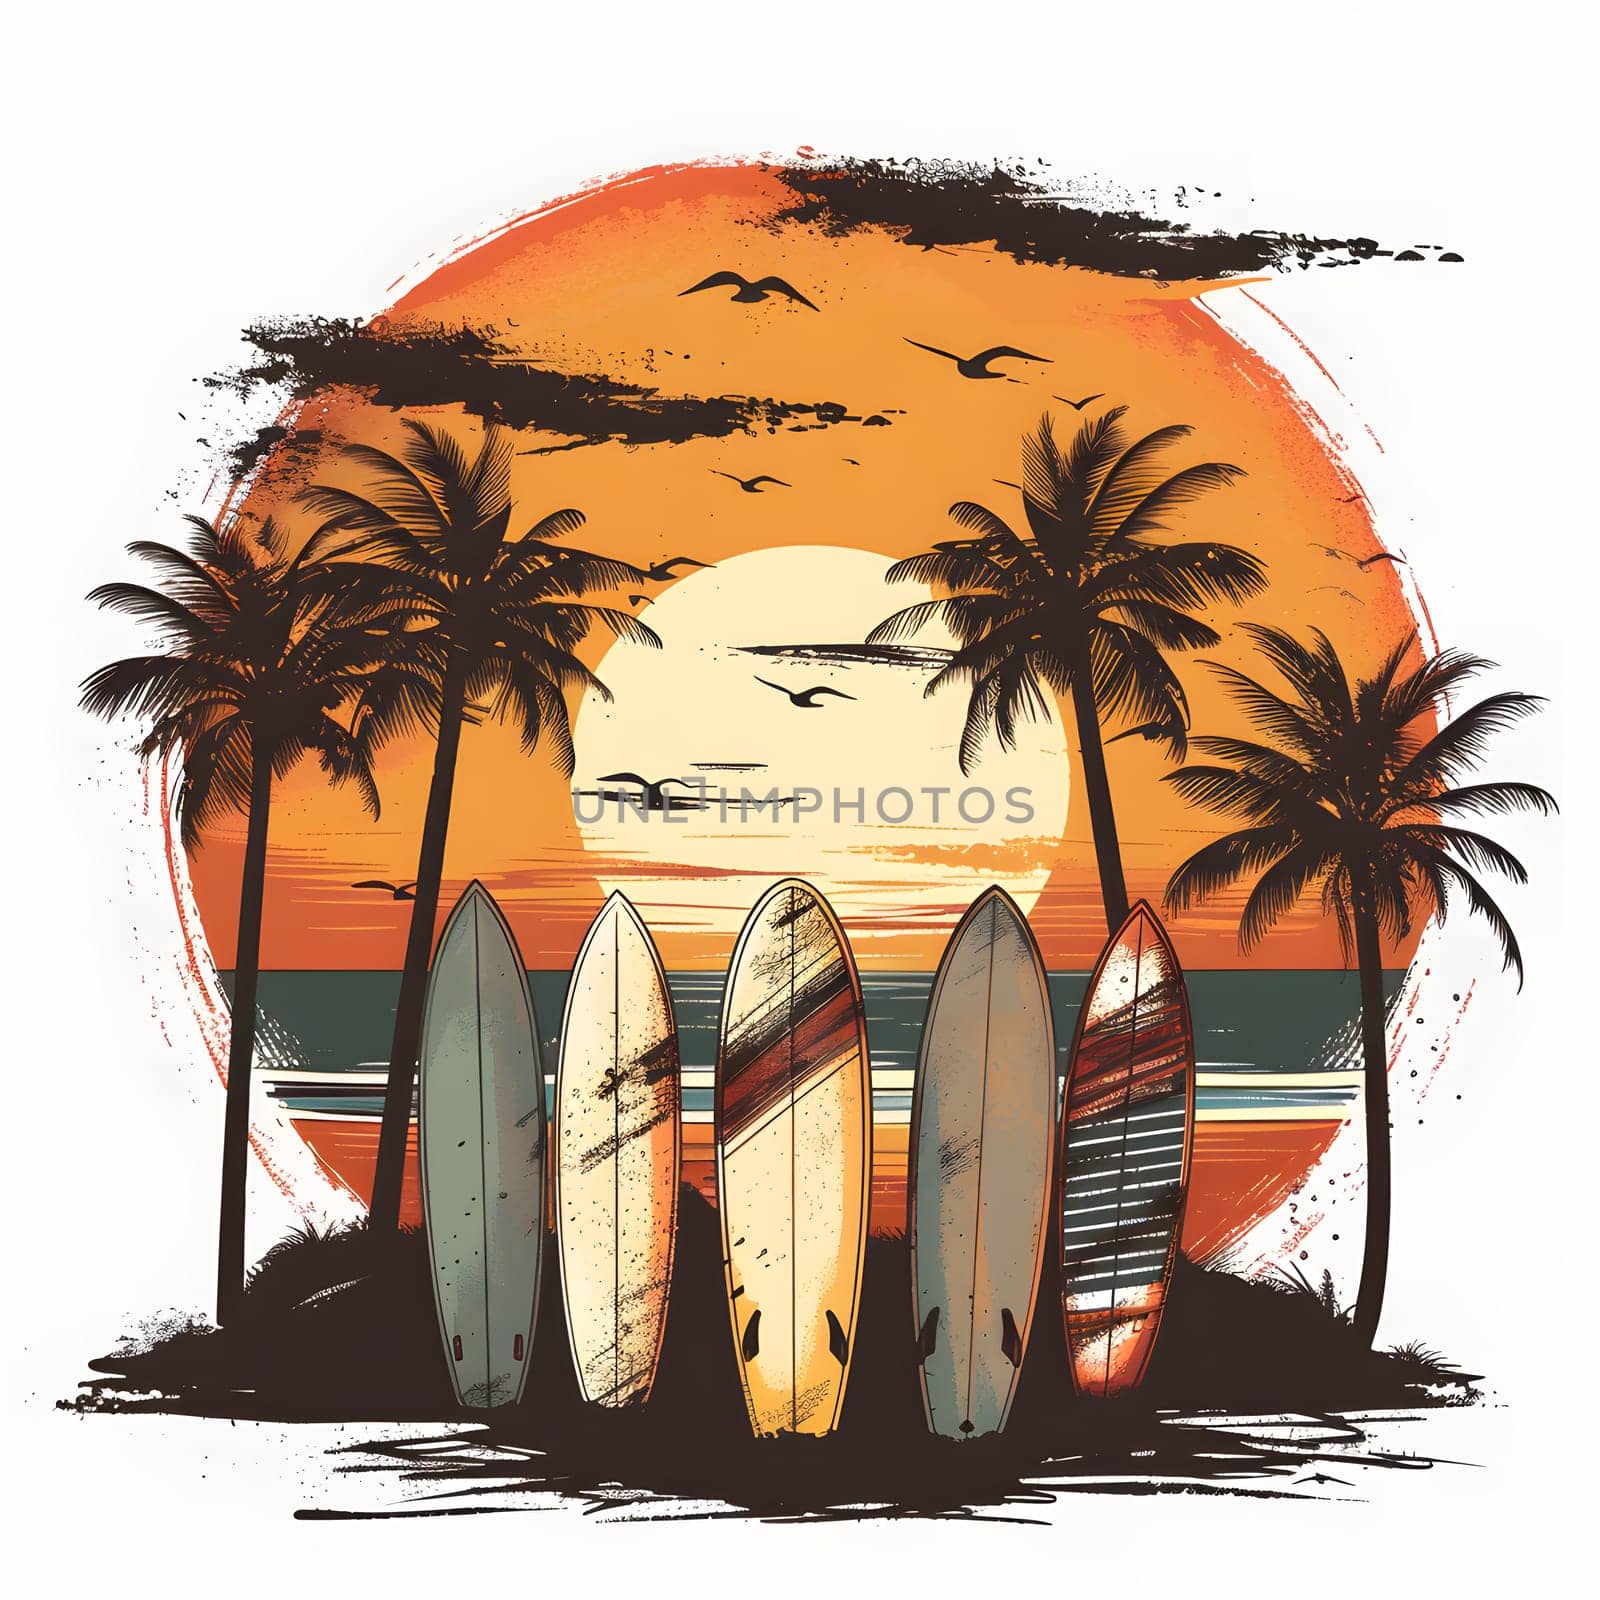 Artistic landscape featuring palm trees, surfboards, and a sunset by Nadtochiy